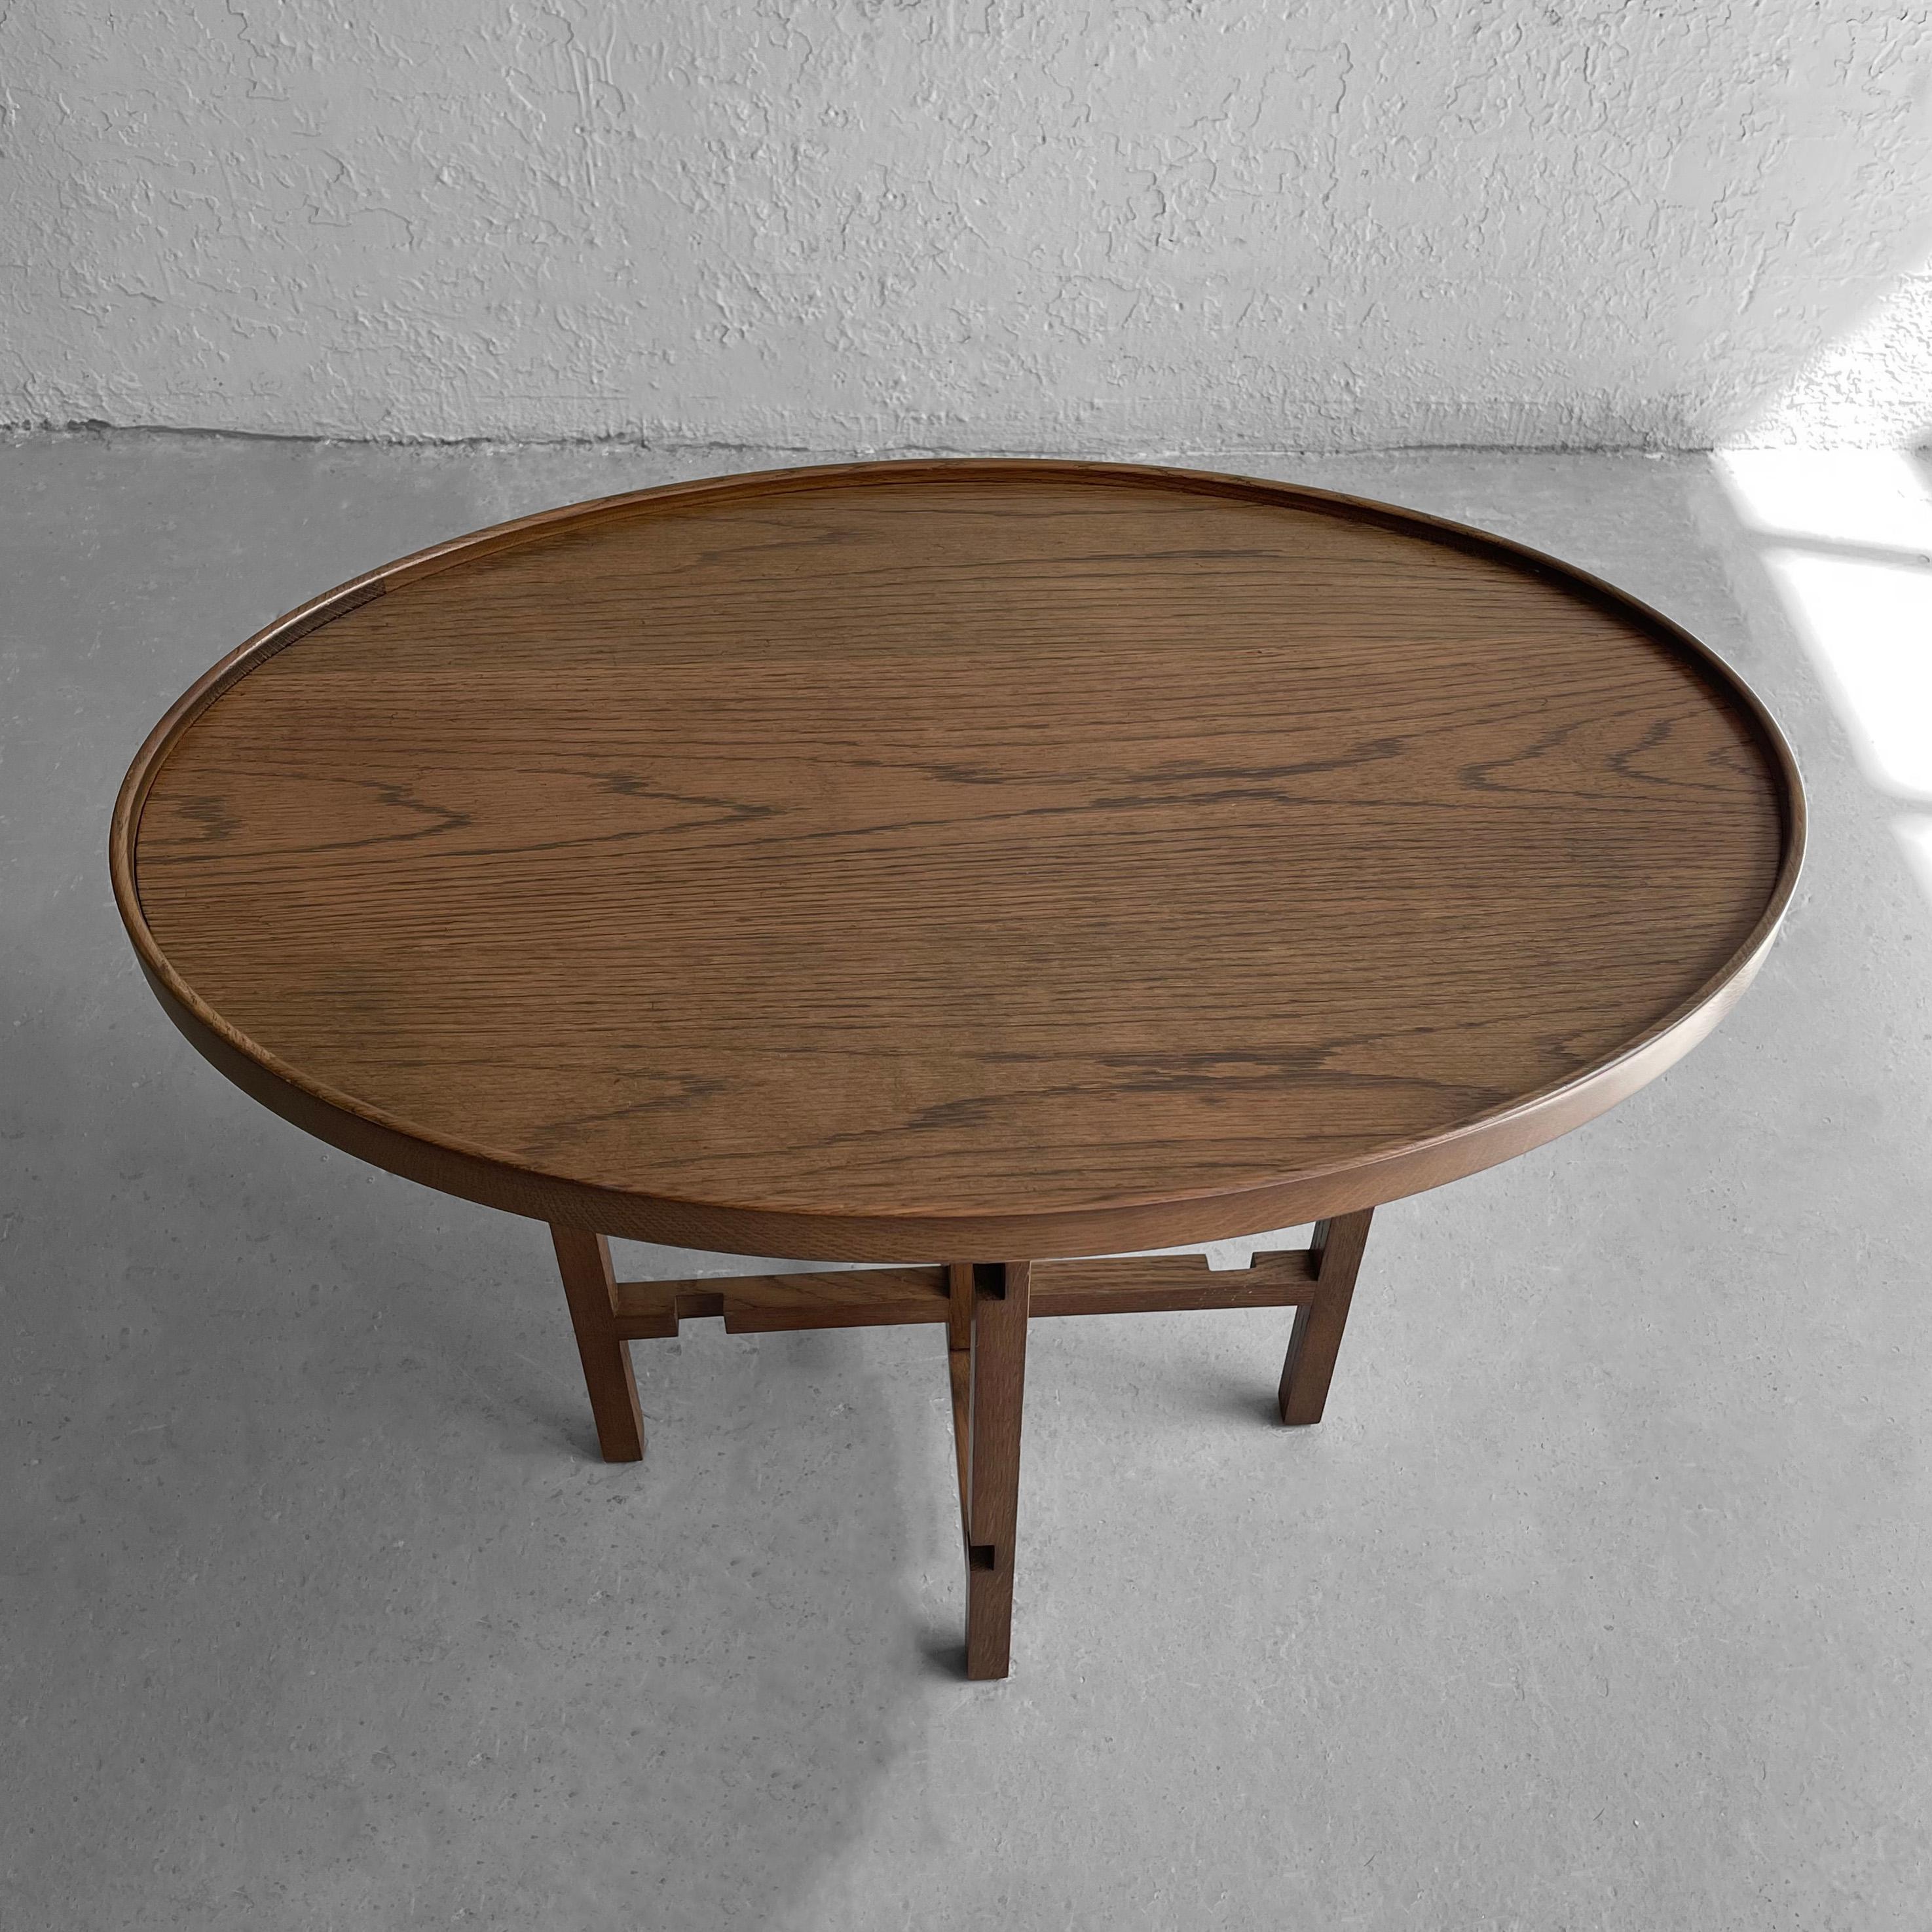 20th Century Arts And Crafts Oval Walnut Side Table For Sale